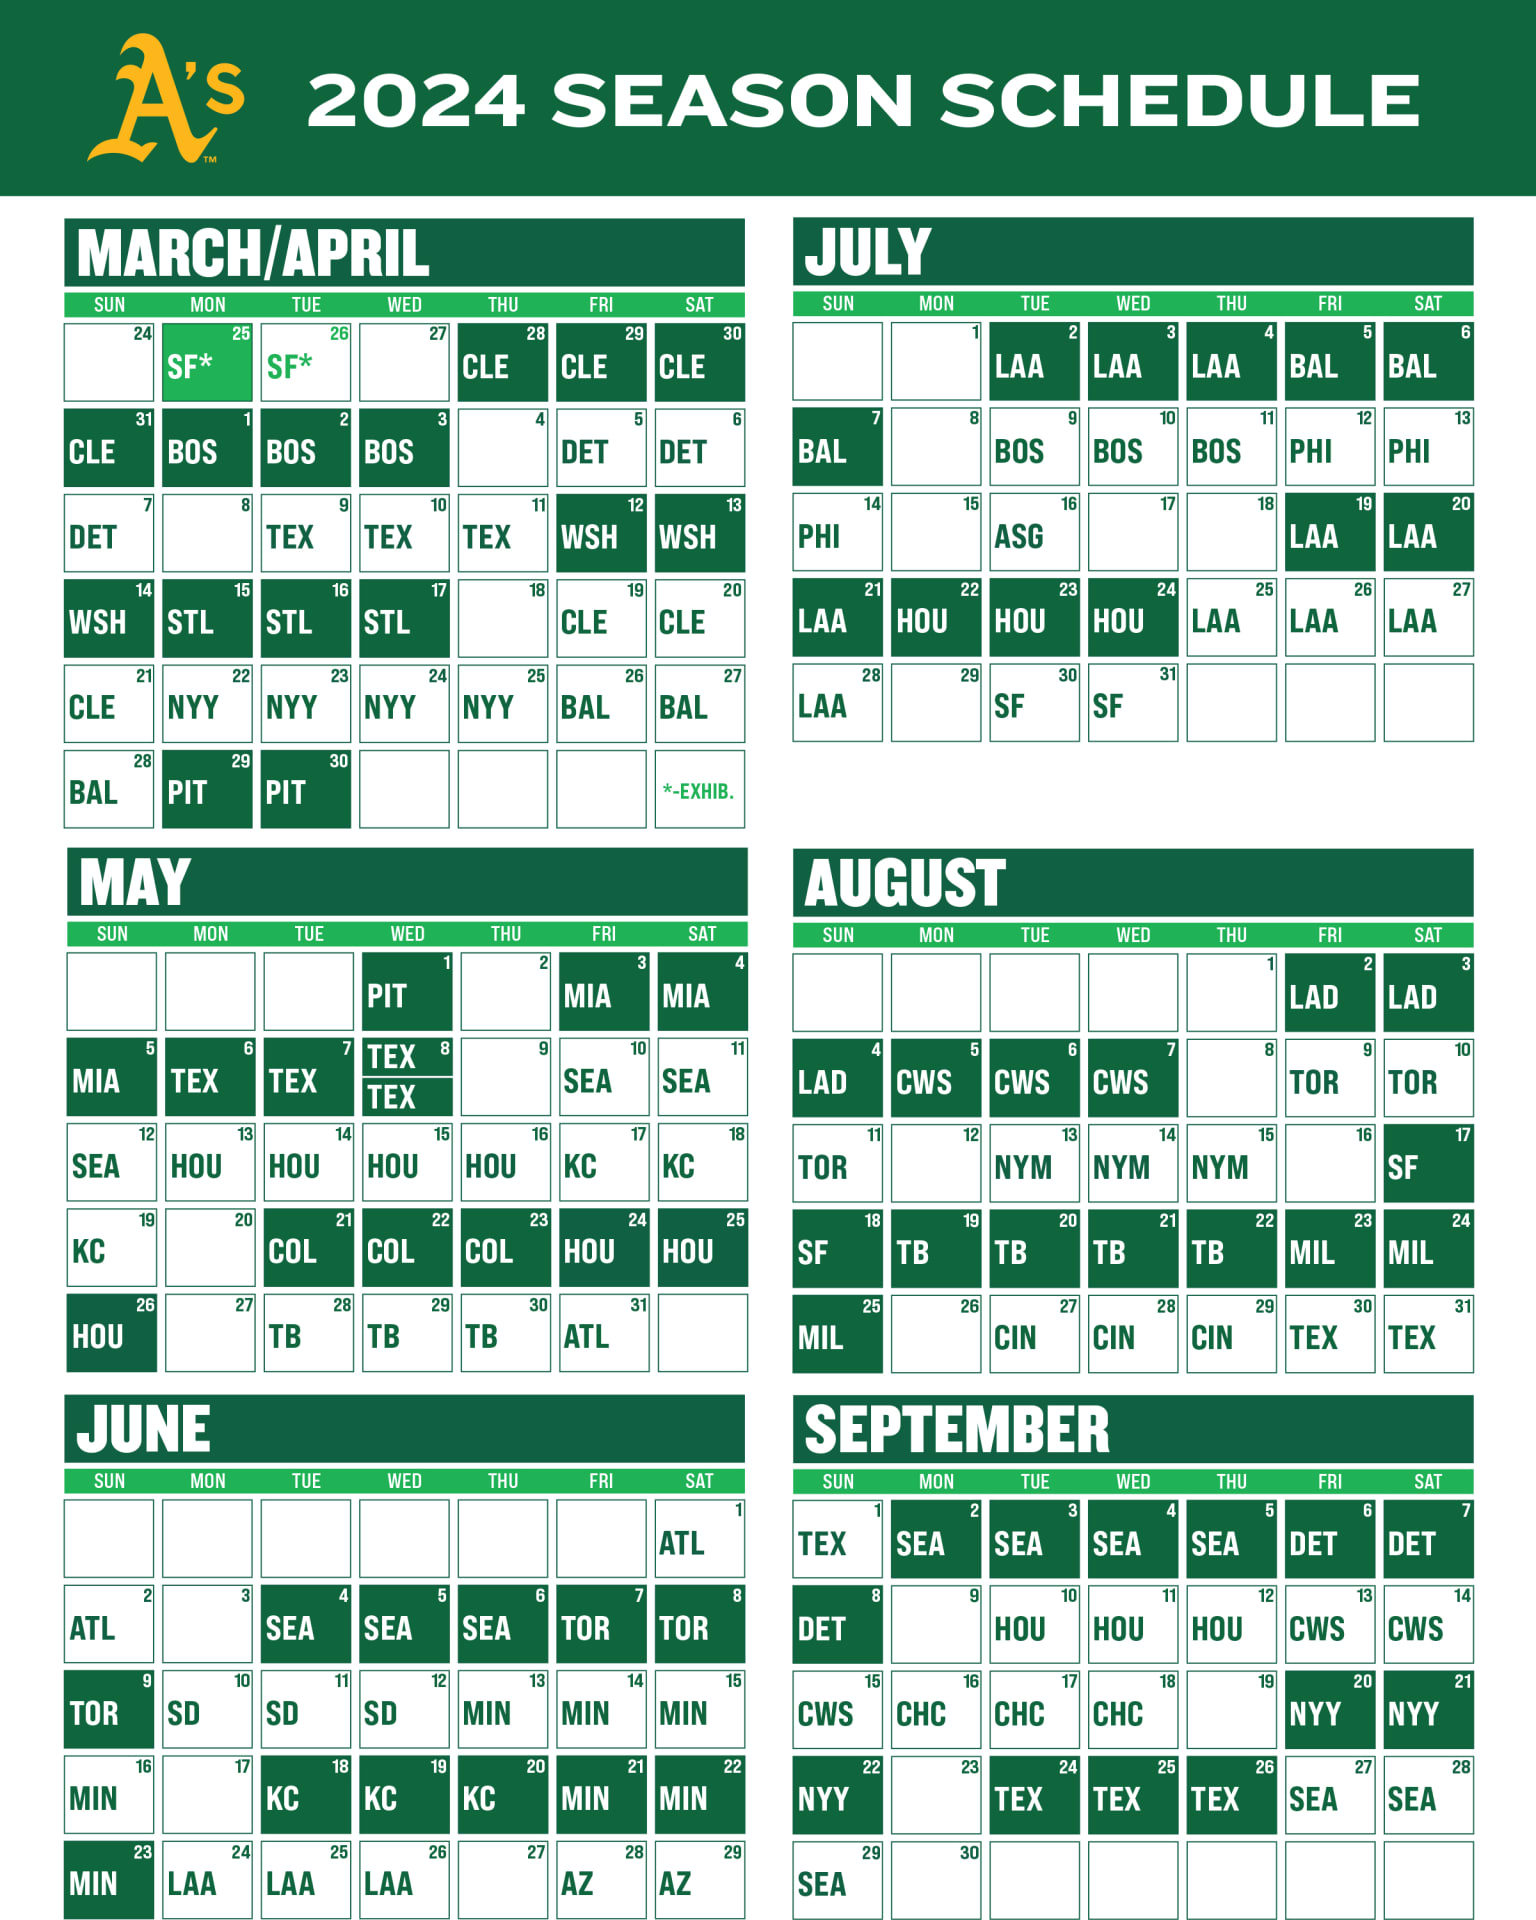 Tigers Downloadable Schedule